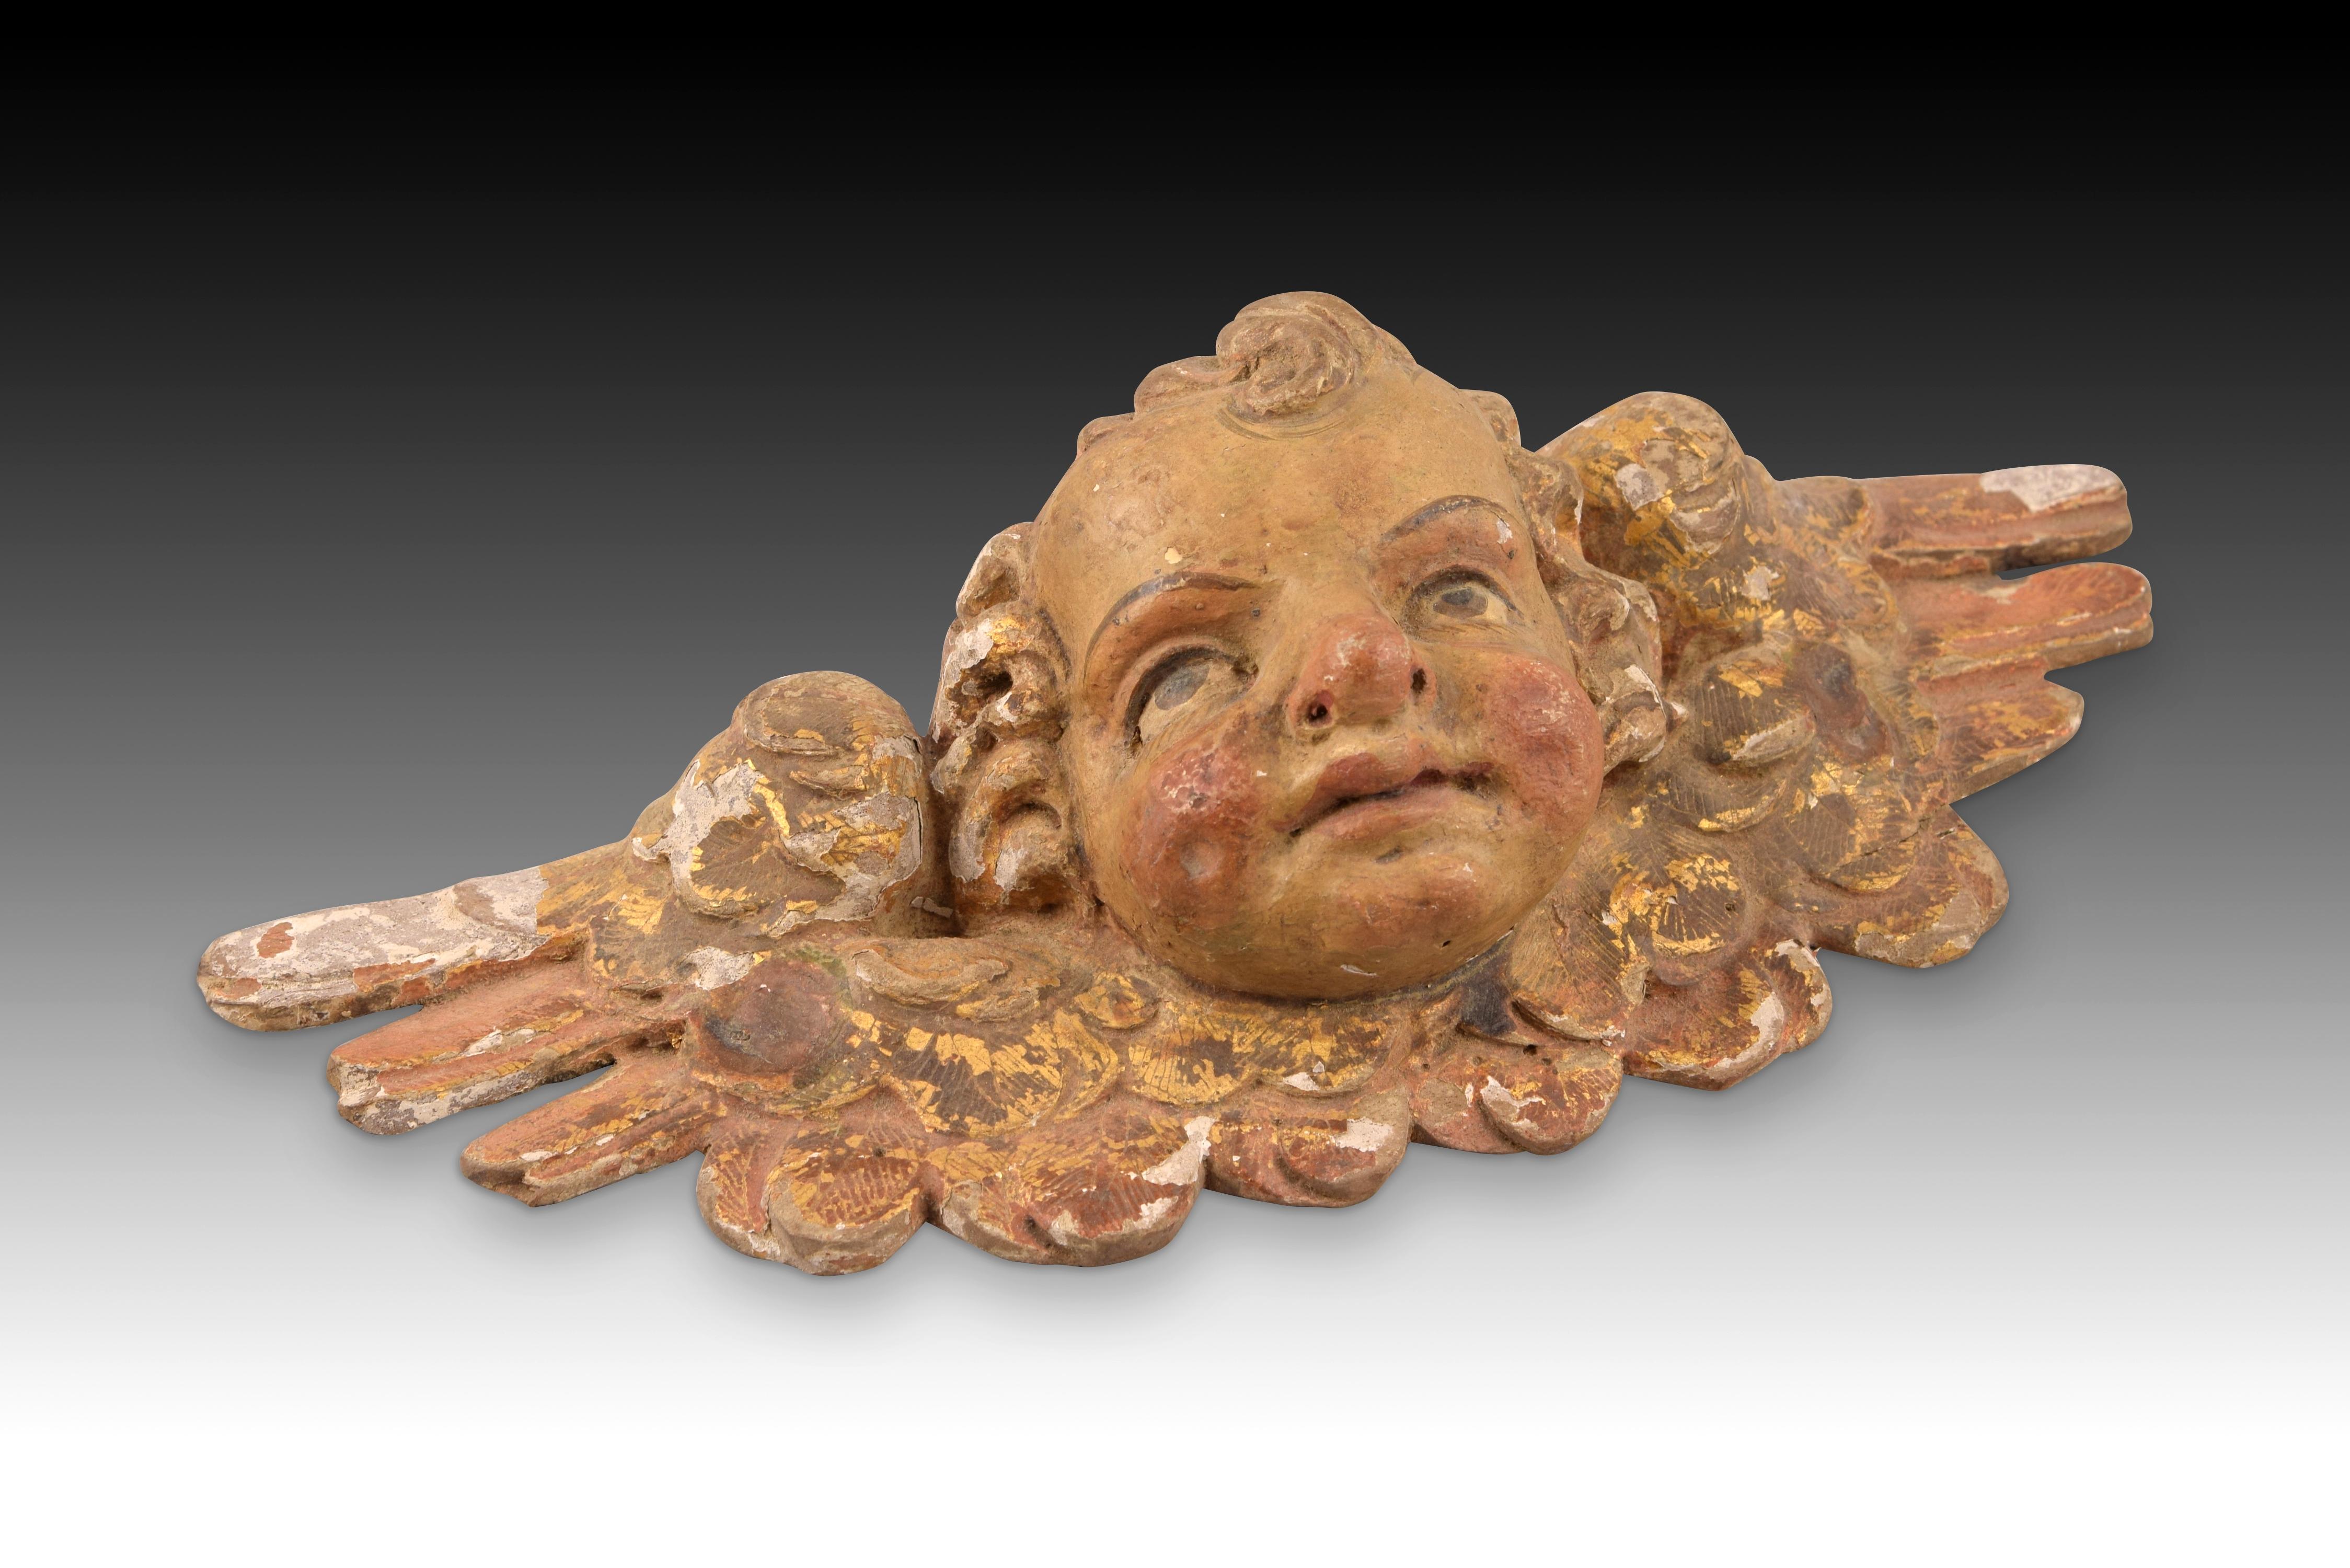 Angel head carved and polychrome wood. XVII century. 
Wood carving with a polychrome finish that shows a child's head with curly hair from which two wings spread to the sides, open and with golden details on the feathers. These types of decorative